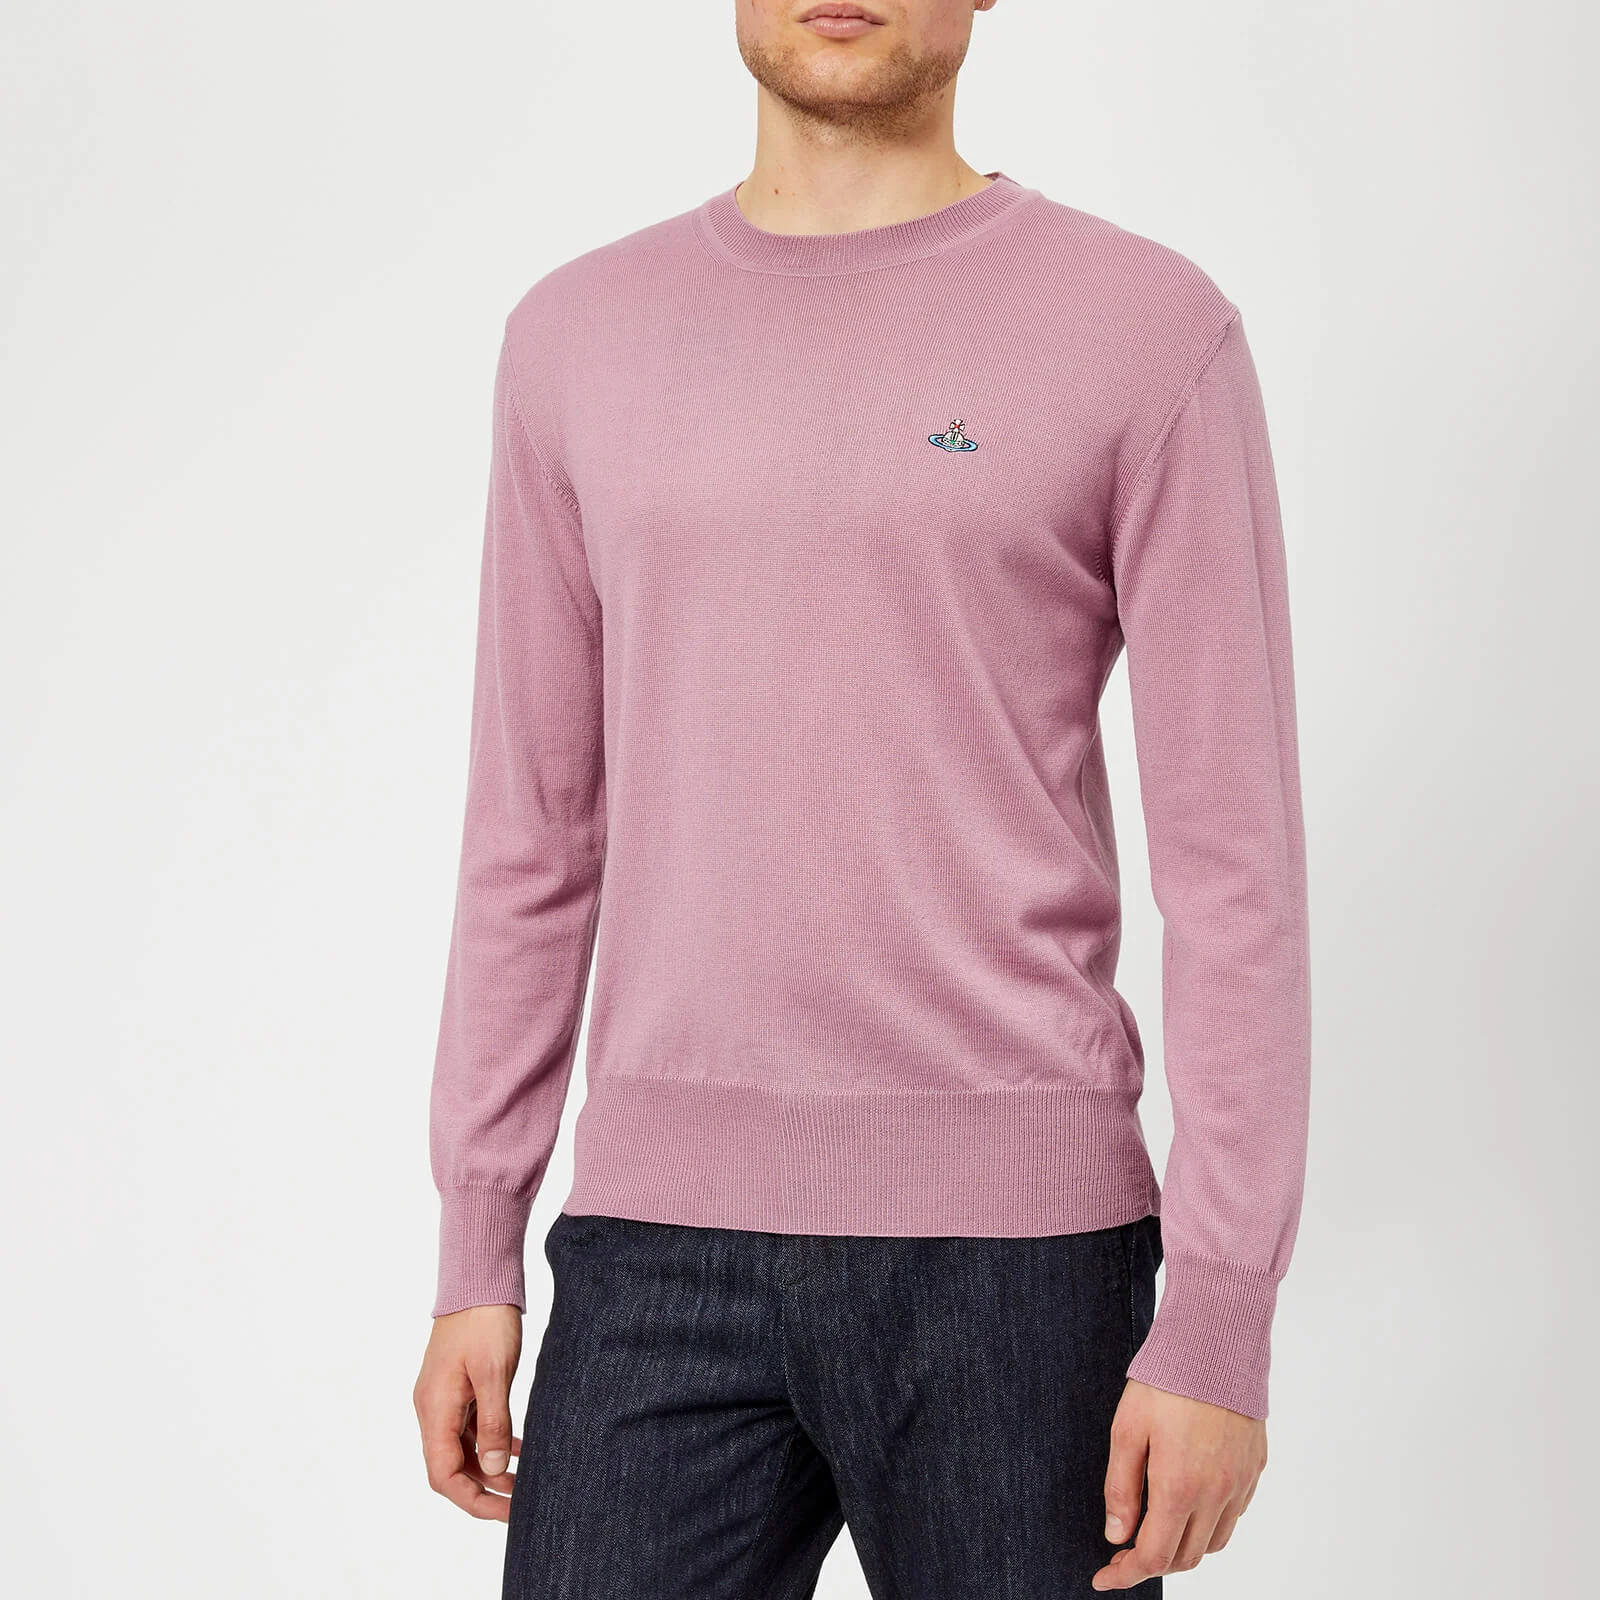 Vivienne Westwood Men's Classic Round Neck Knitted Jumper - Dusty Pink Image 1